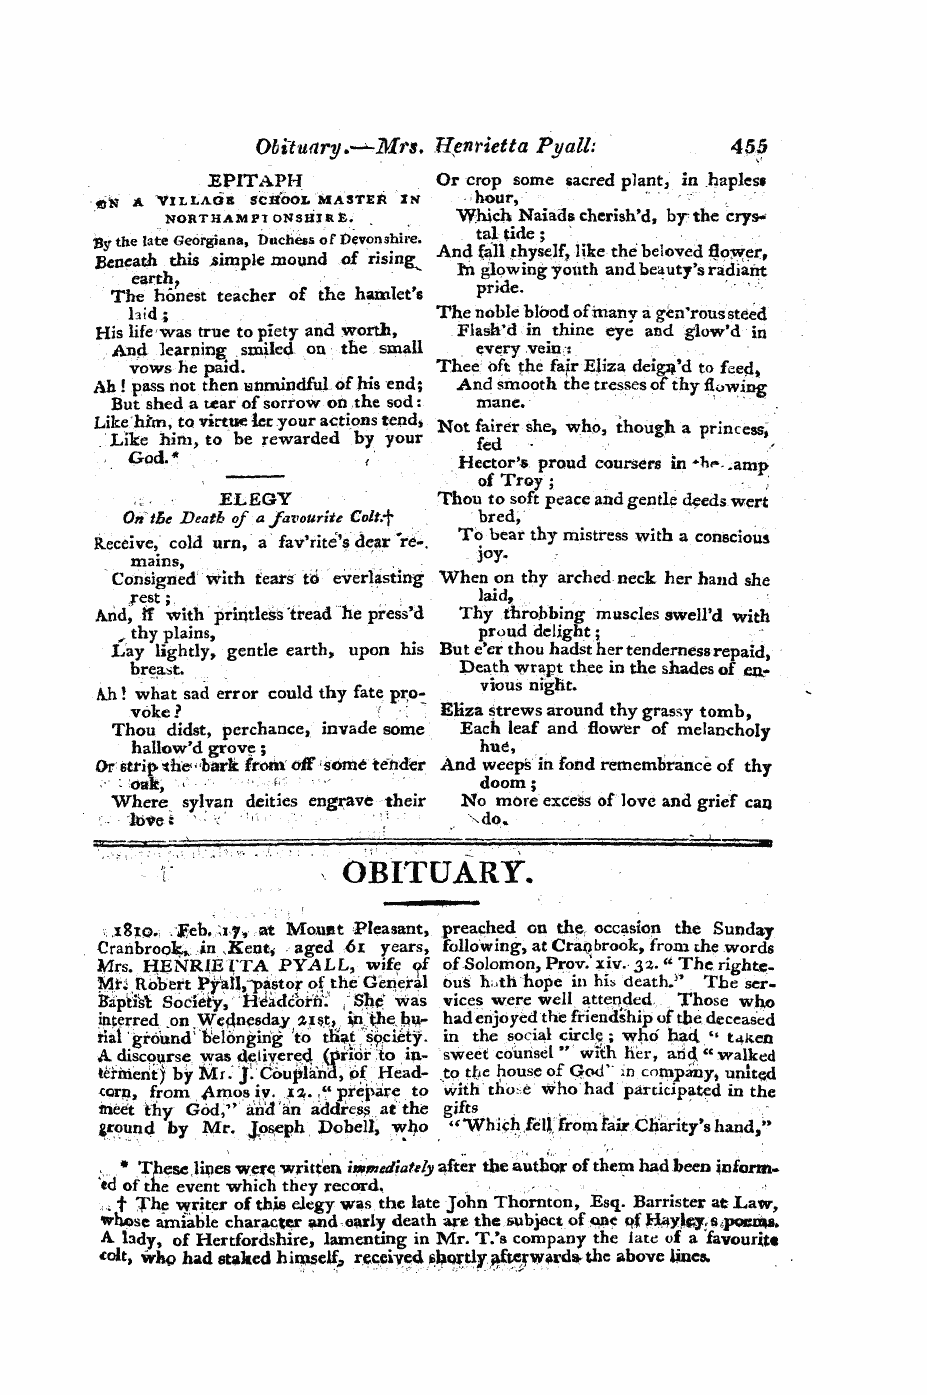 Monthly Repository (1806-1838) and Unitarian Chronicle (1832-1833): F Y, 1st edition - I Obituary.